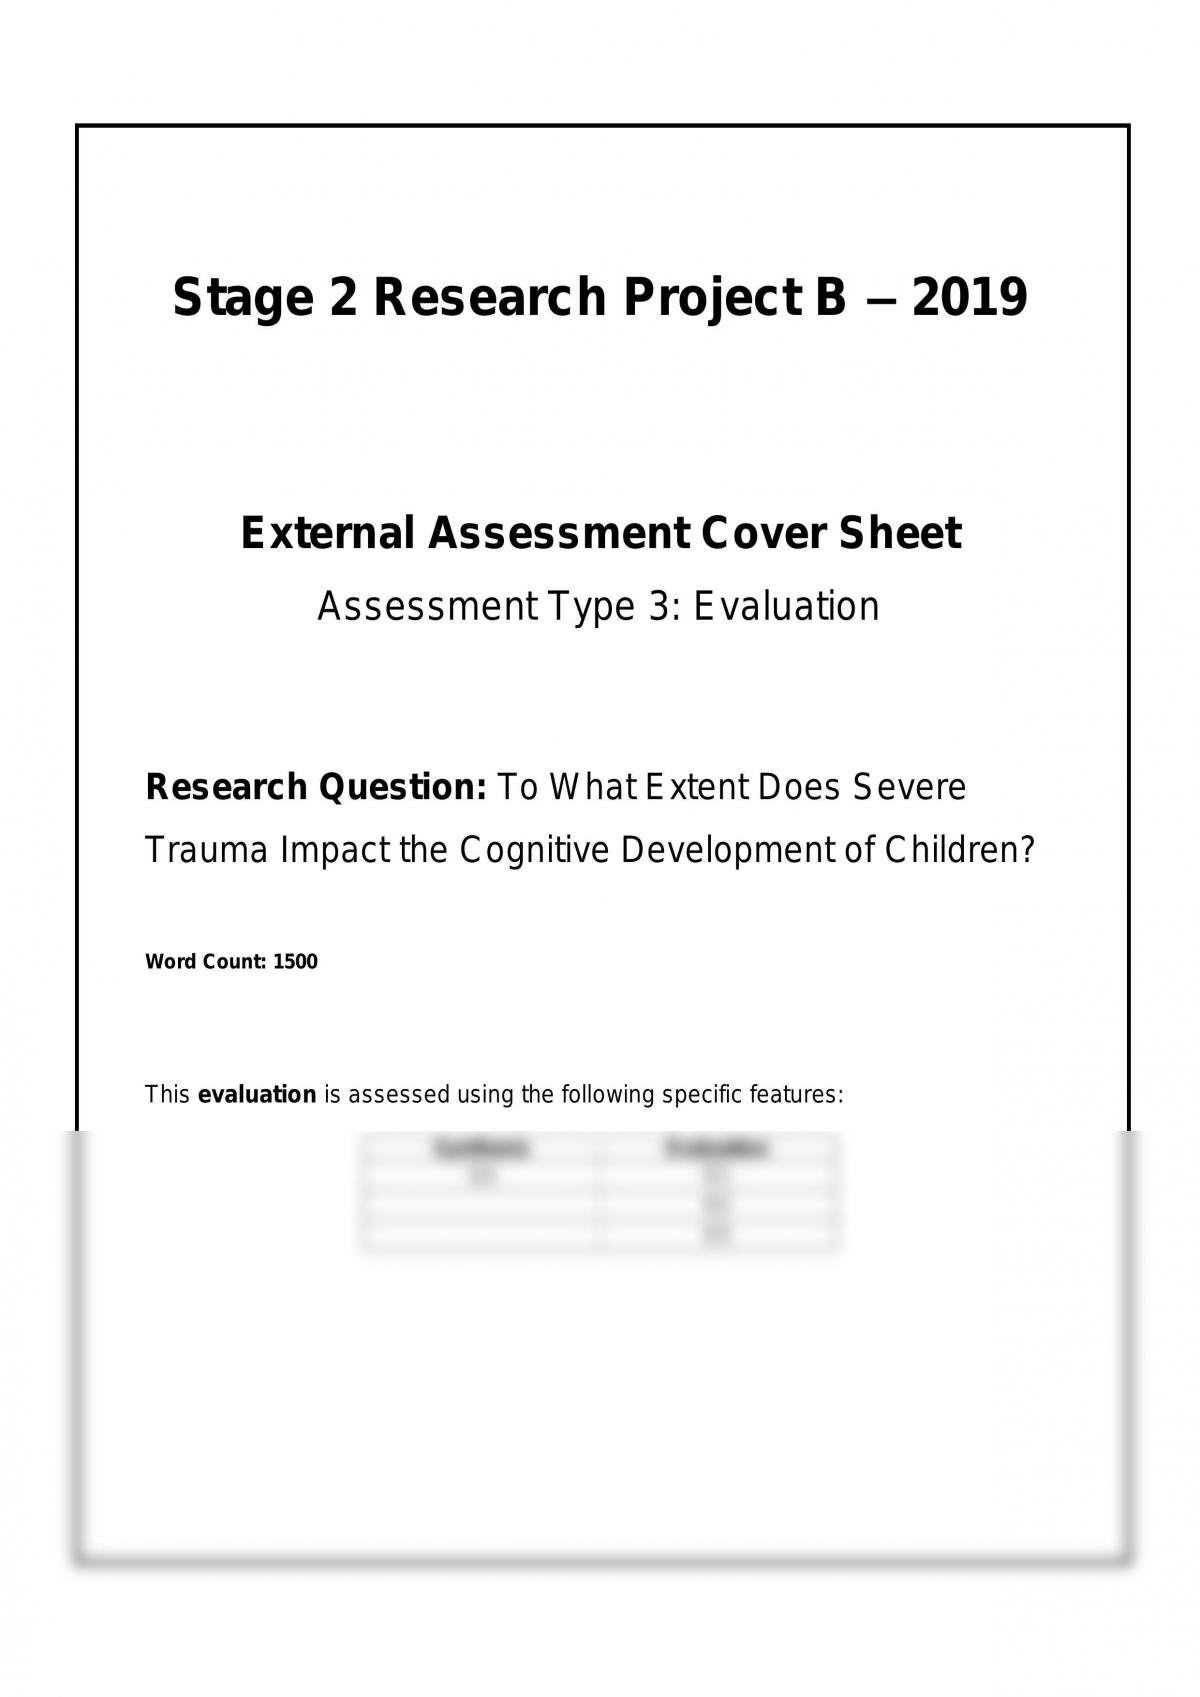 research project b evaluation